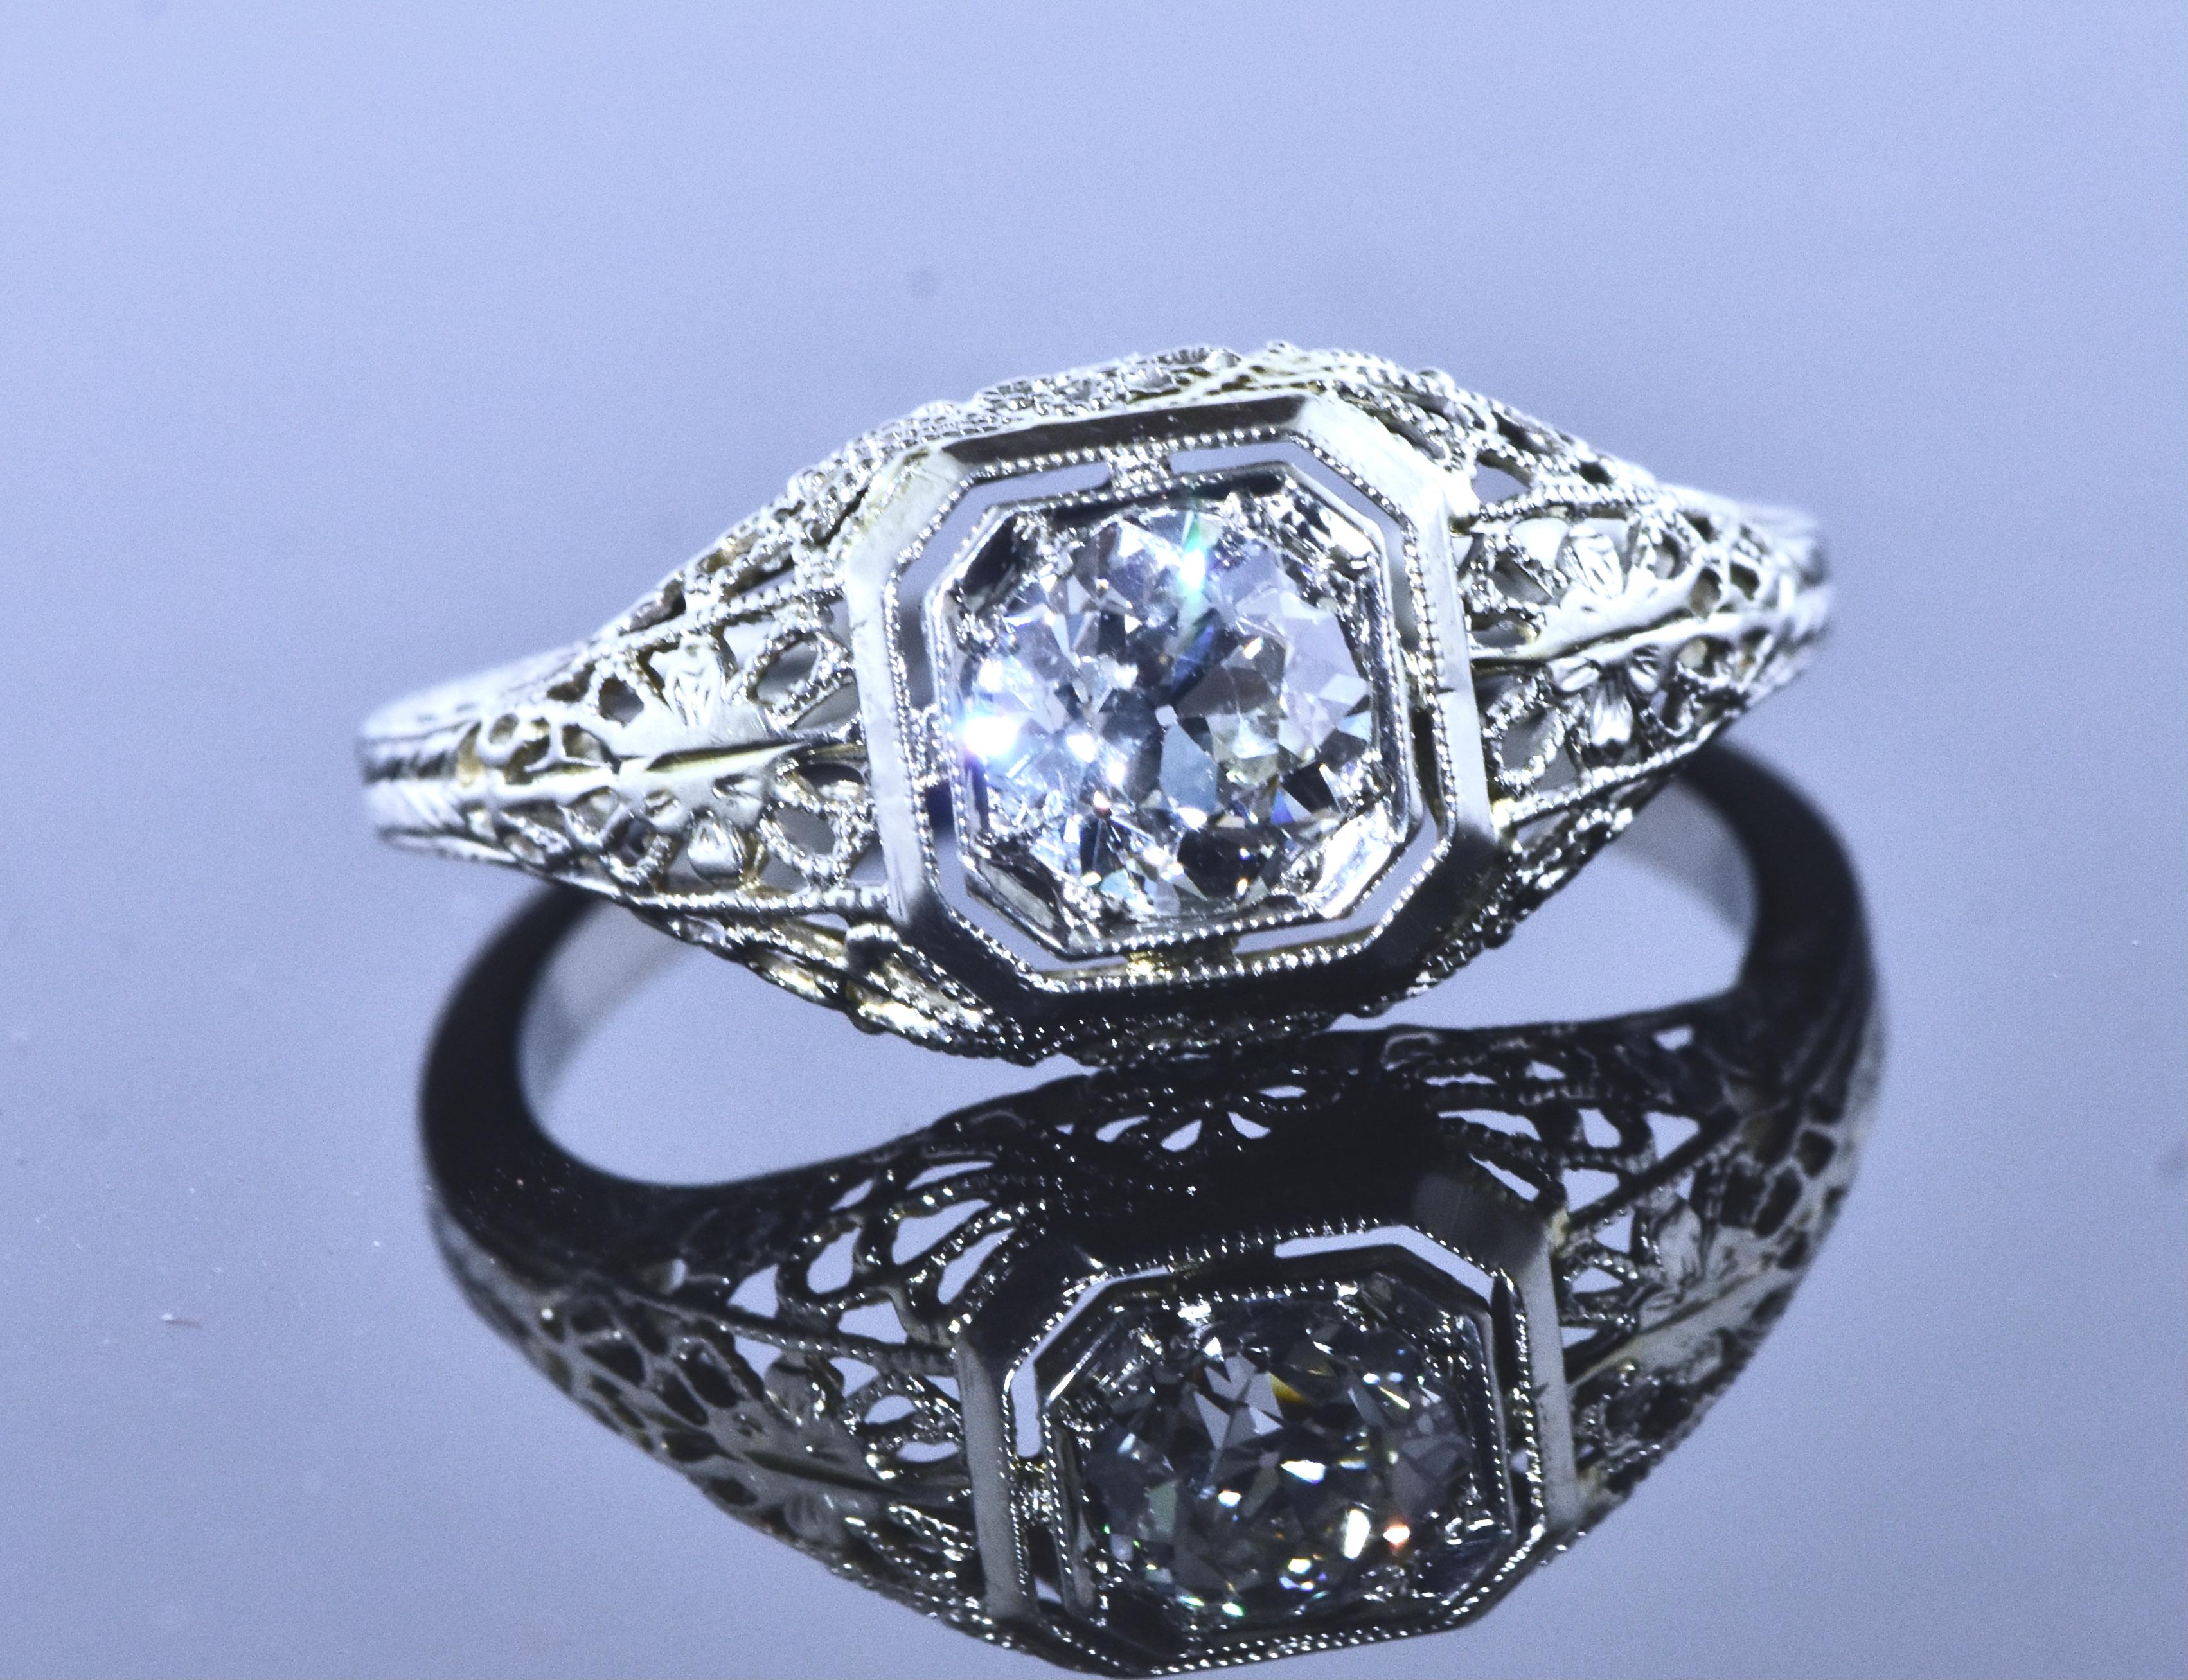 Antique Filigree Fine .65 Ct. Diamond and 18K White Gold Ring, American, c. 1920 For Sale 4